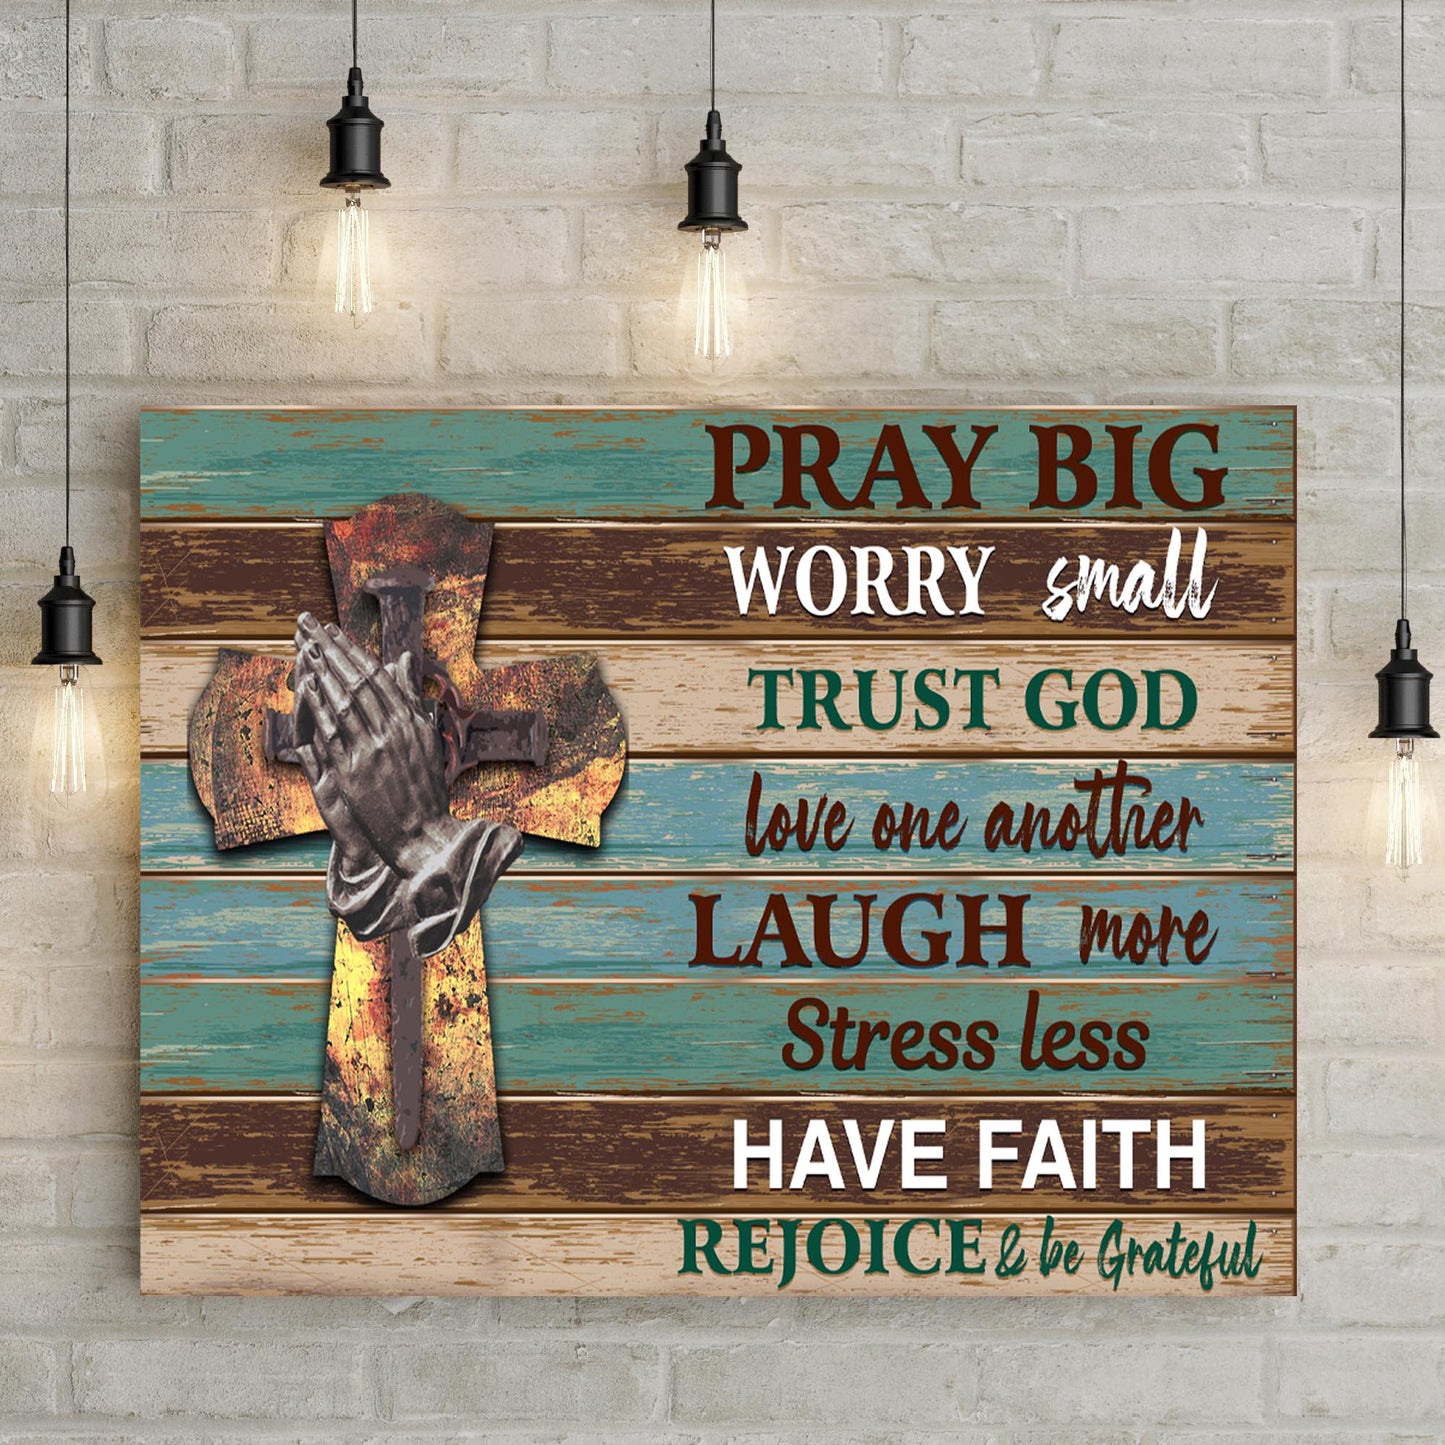 Pray Big Worry Small Sign - Image by Tailored Canvases